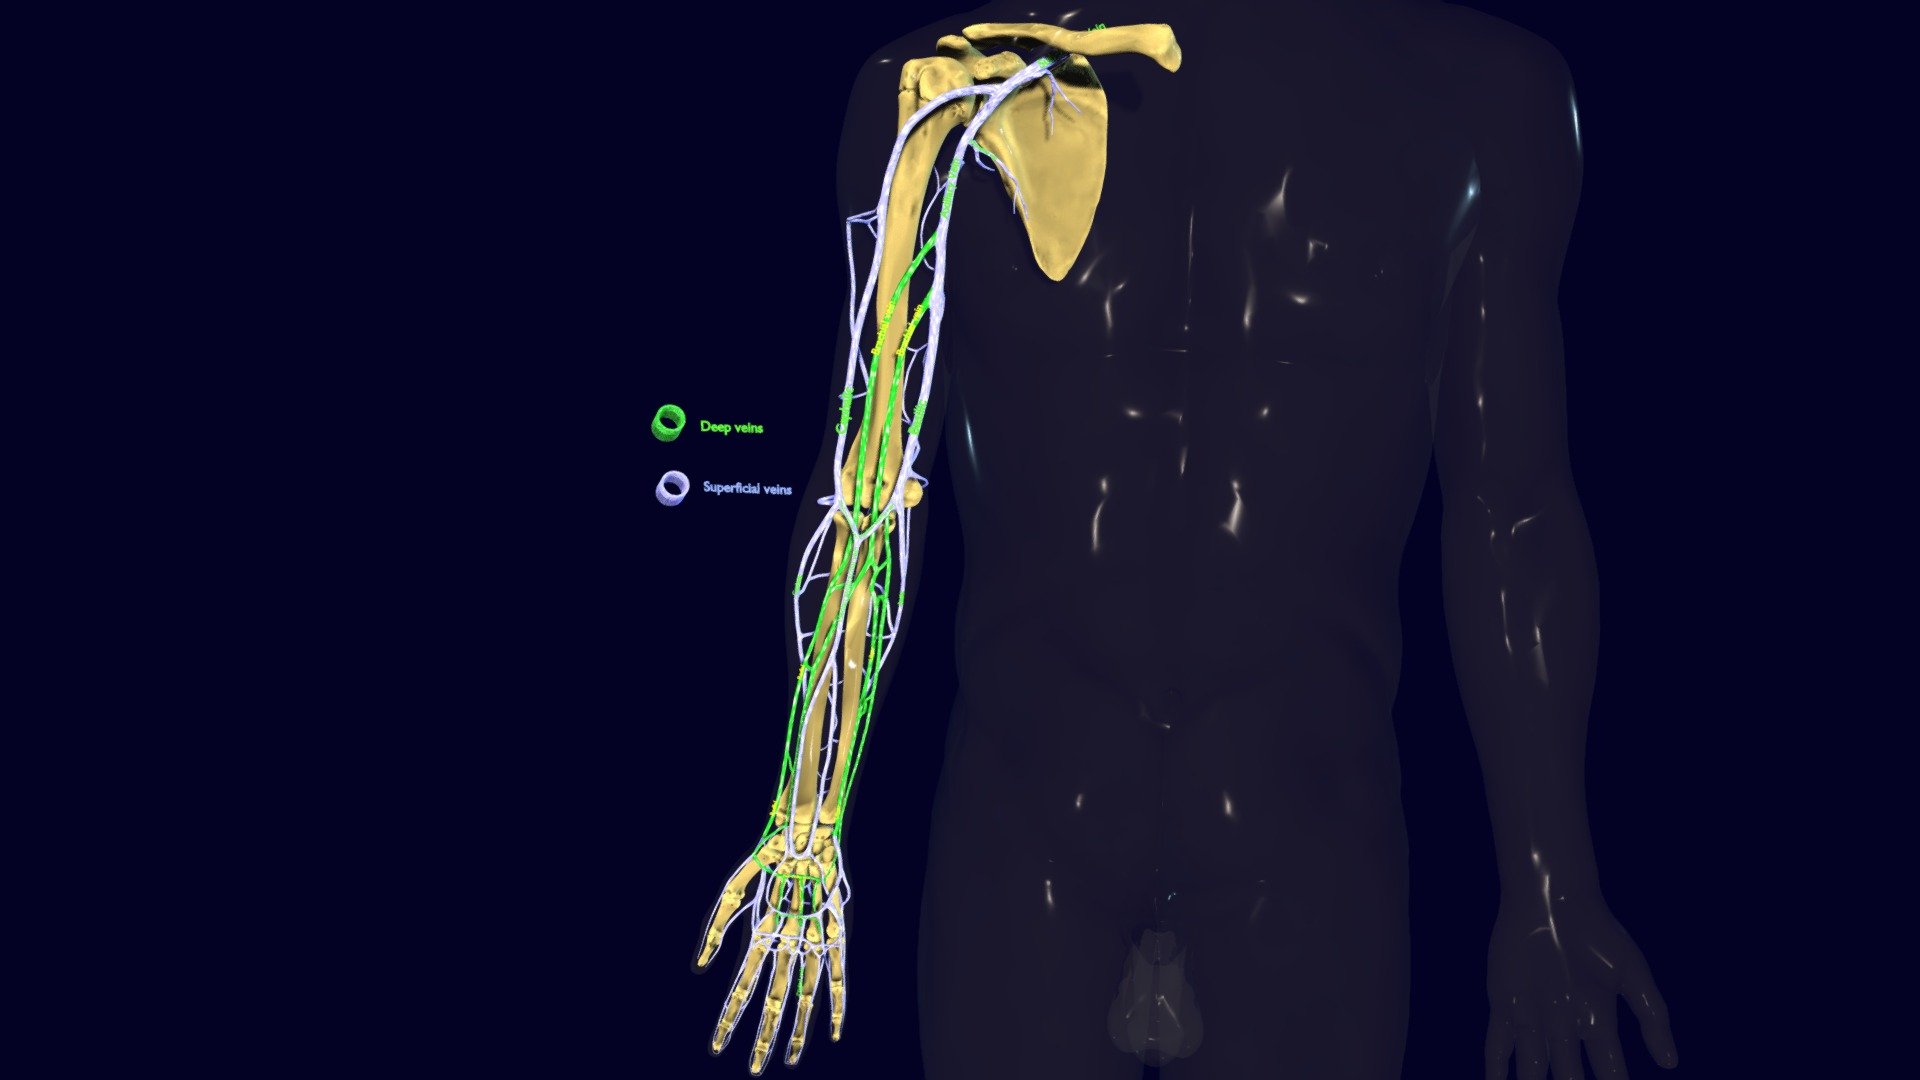 A blend file model of 1:1 scale with three group of meshes i.e. skin, bones and veins. The venous drainage of upper limb is anatomically precise and labelled. The labels are well placed in approximity to the respective veins to avoid any confusion. Zooming within the model displays the smaller sized labels as well. The deep veins have been shaded green to differentiate them from superficial veins in blue. The materials are UV textures and normals which are non overlapping. Model for medical schools and colleges 3d model